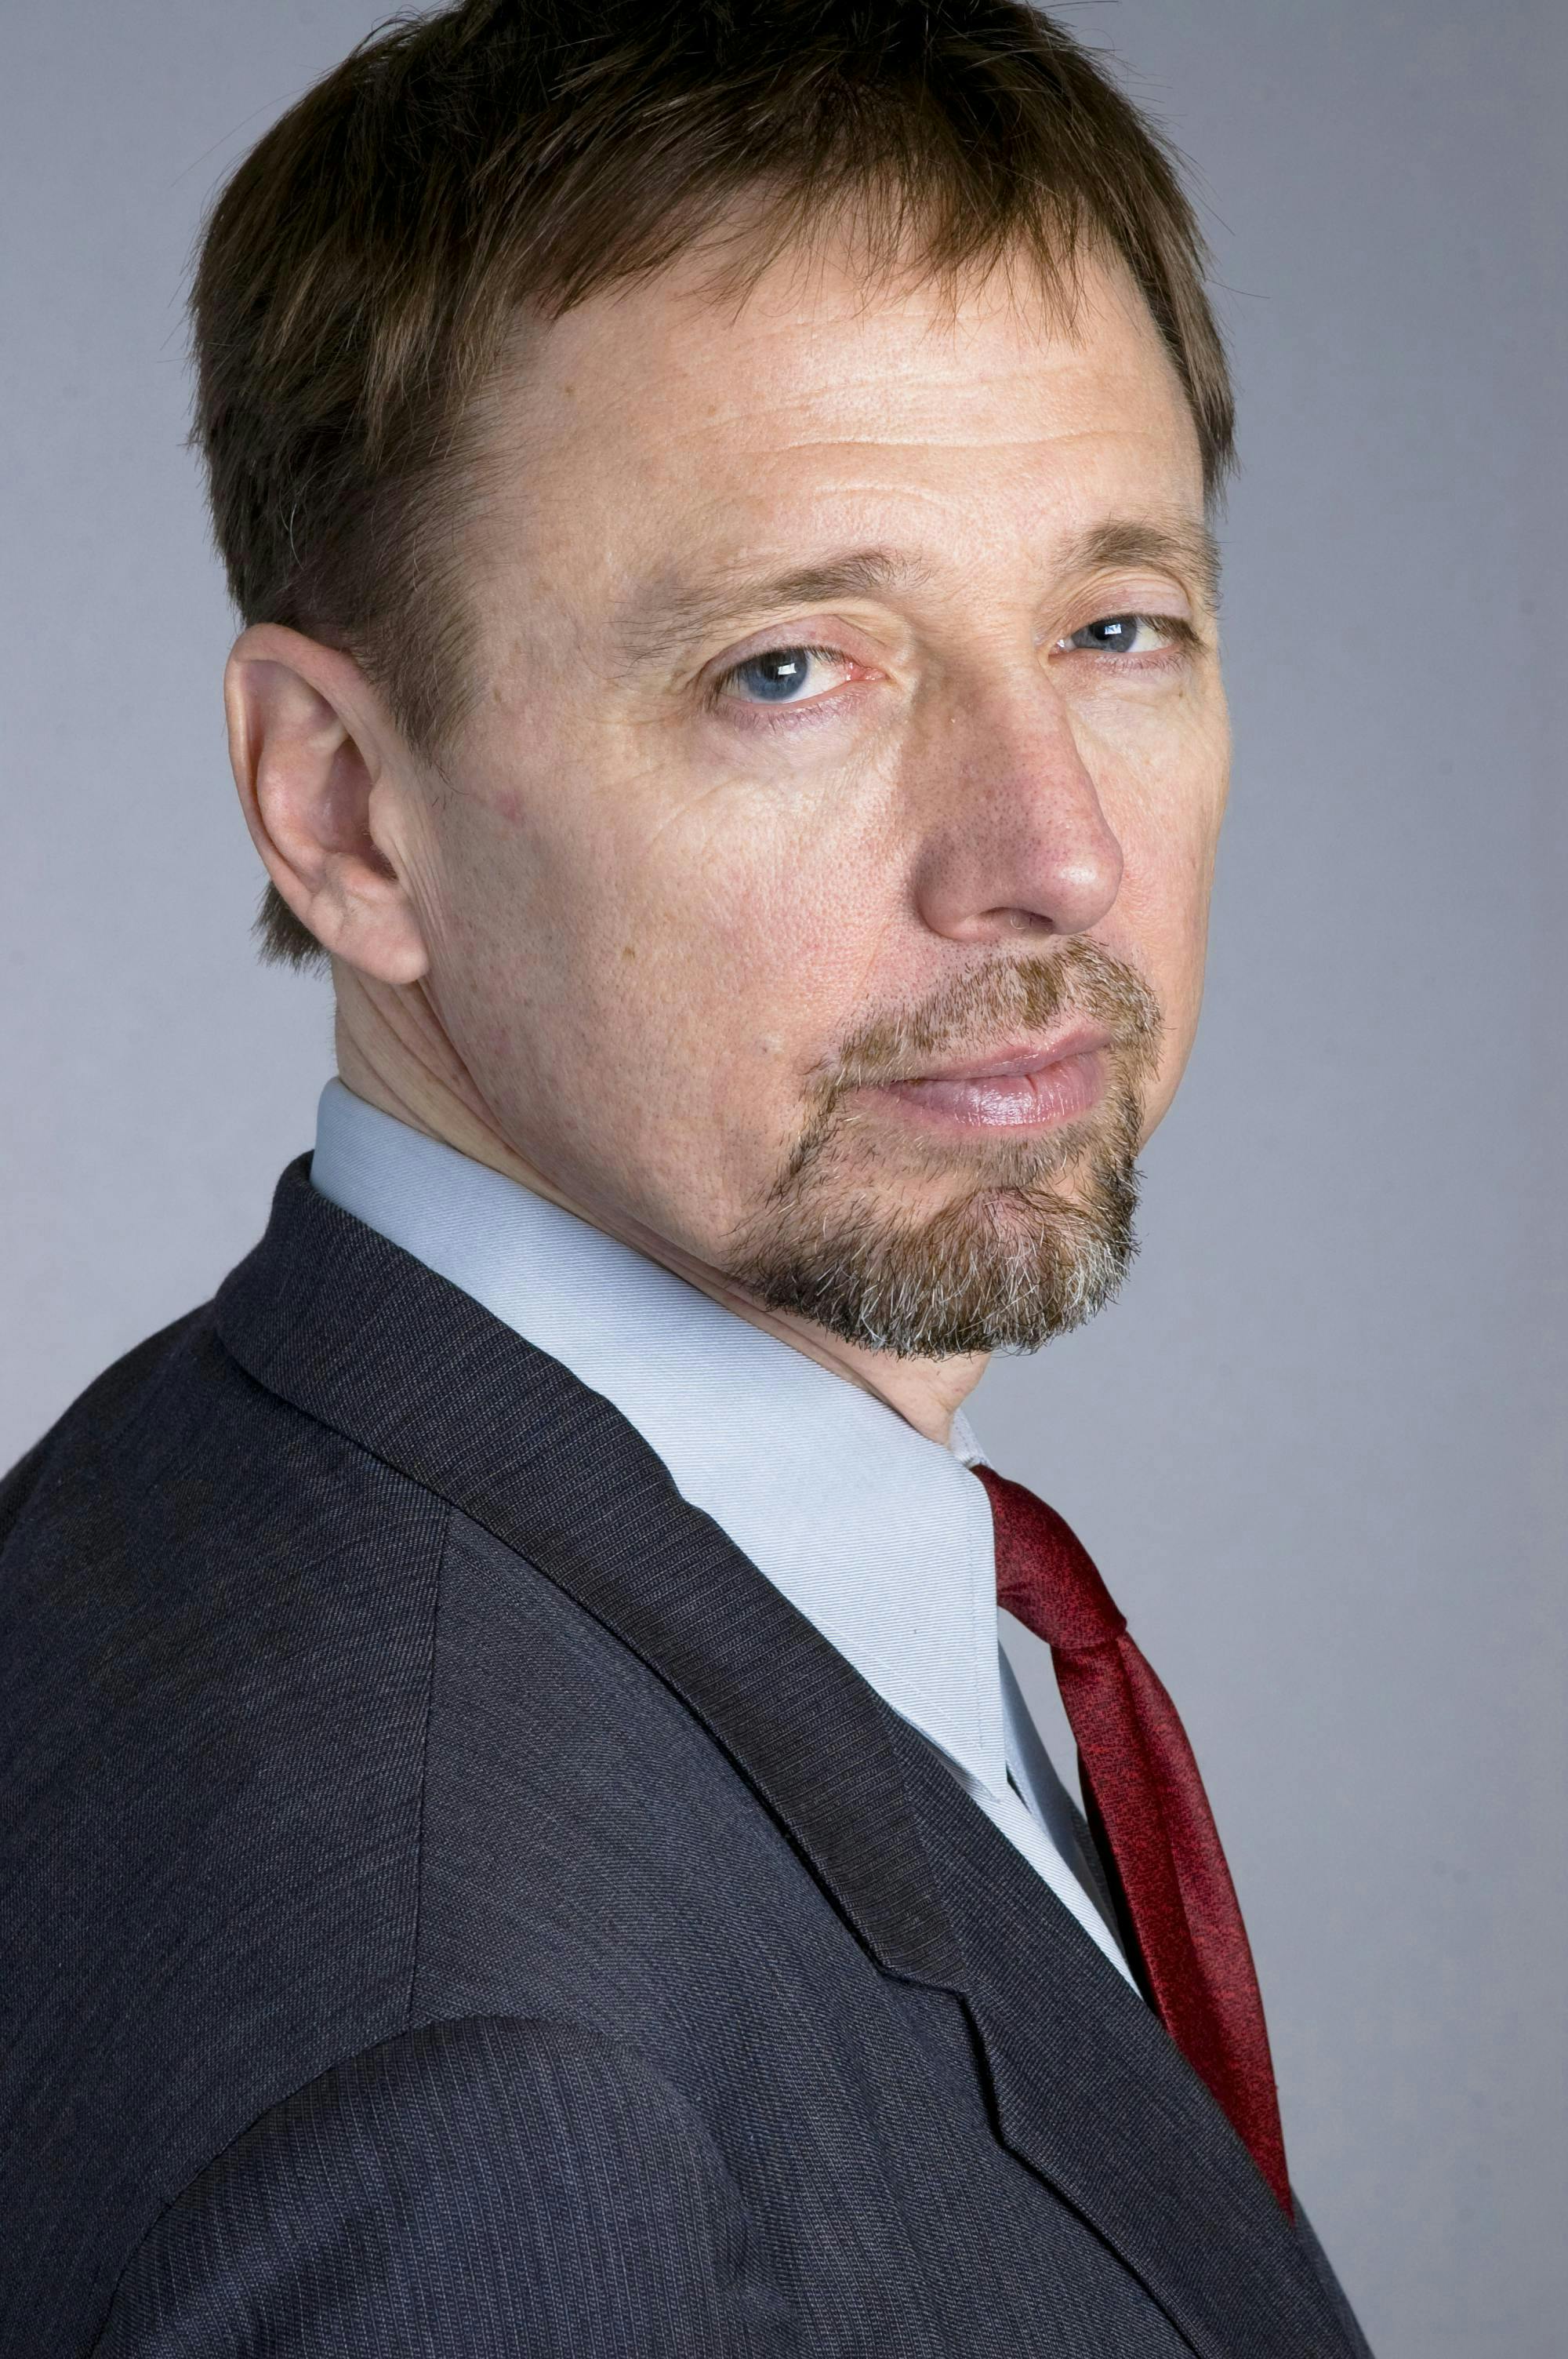 Middle-aged man with short brown hair and a goatee wearing a suit, white shirt, and red tie, facing the camera with a serious expression against a plain gray background.